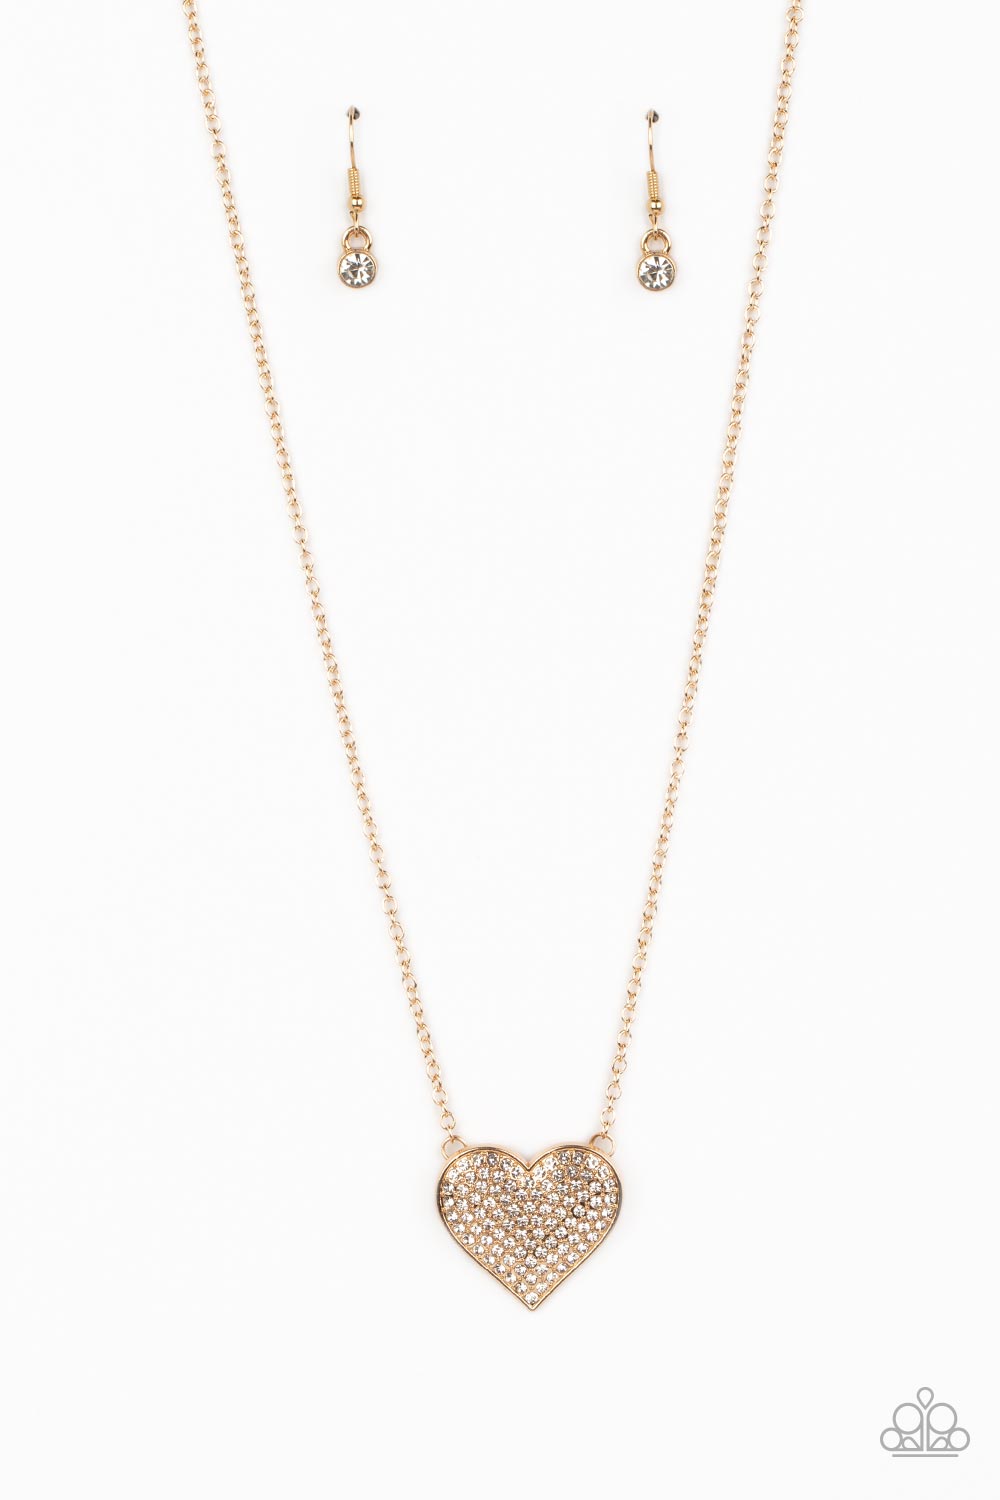 Paparazzi Accessories Spellbinding Sweetheart - Gold A heart-shaped pendant in a gold finish is anchored between two strands of delicate chain in the same reflective finish. The interior of the heart is filled with glittery white rhinestones, inviting onl